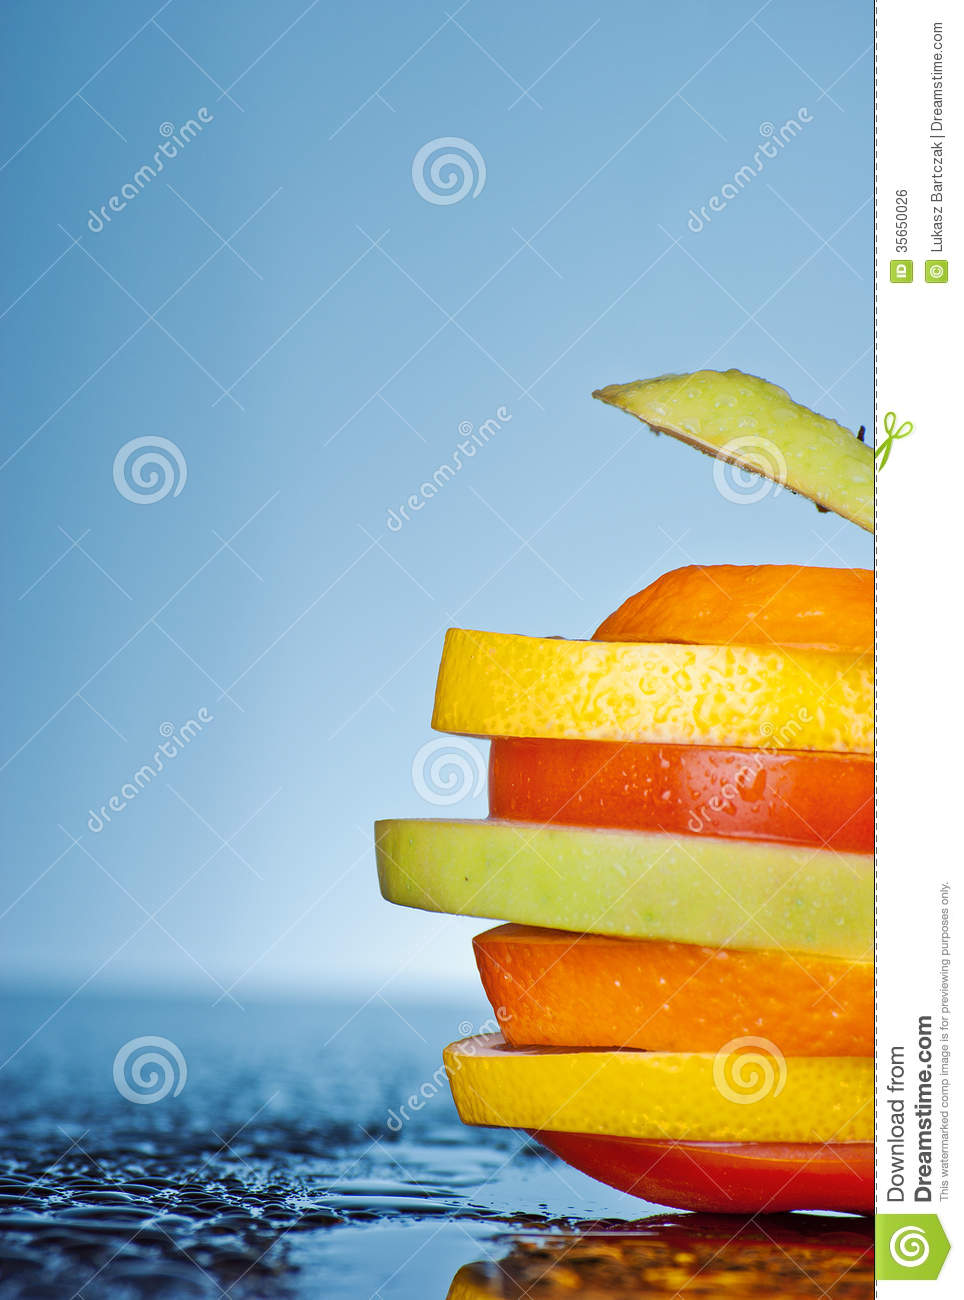 Stay Healthy Royalty Free Stock Image   Image  35650026